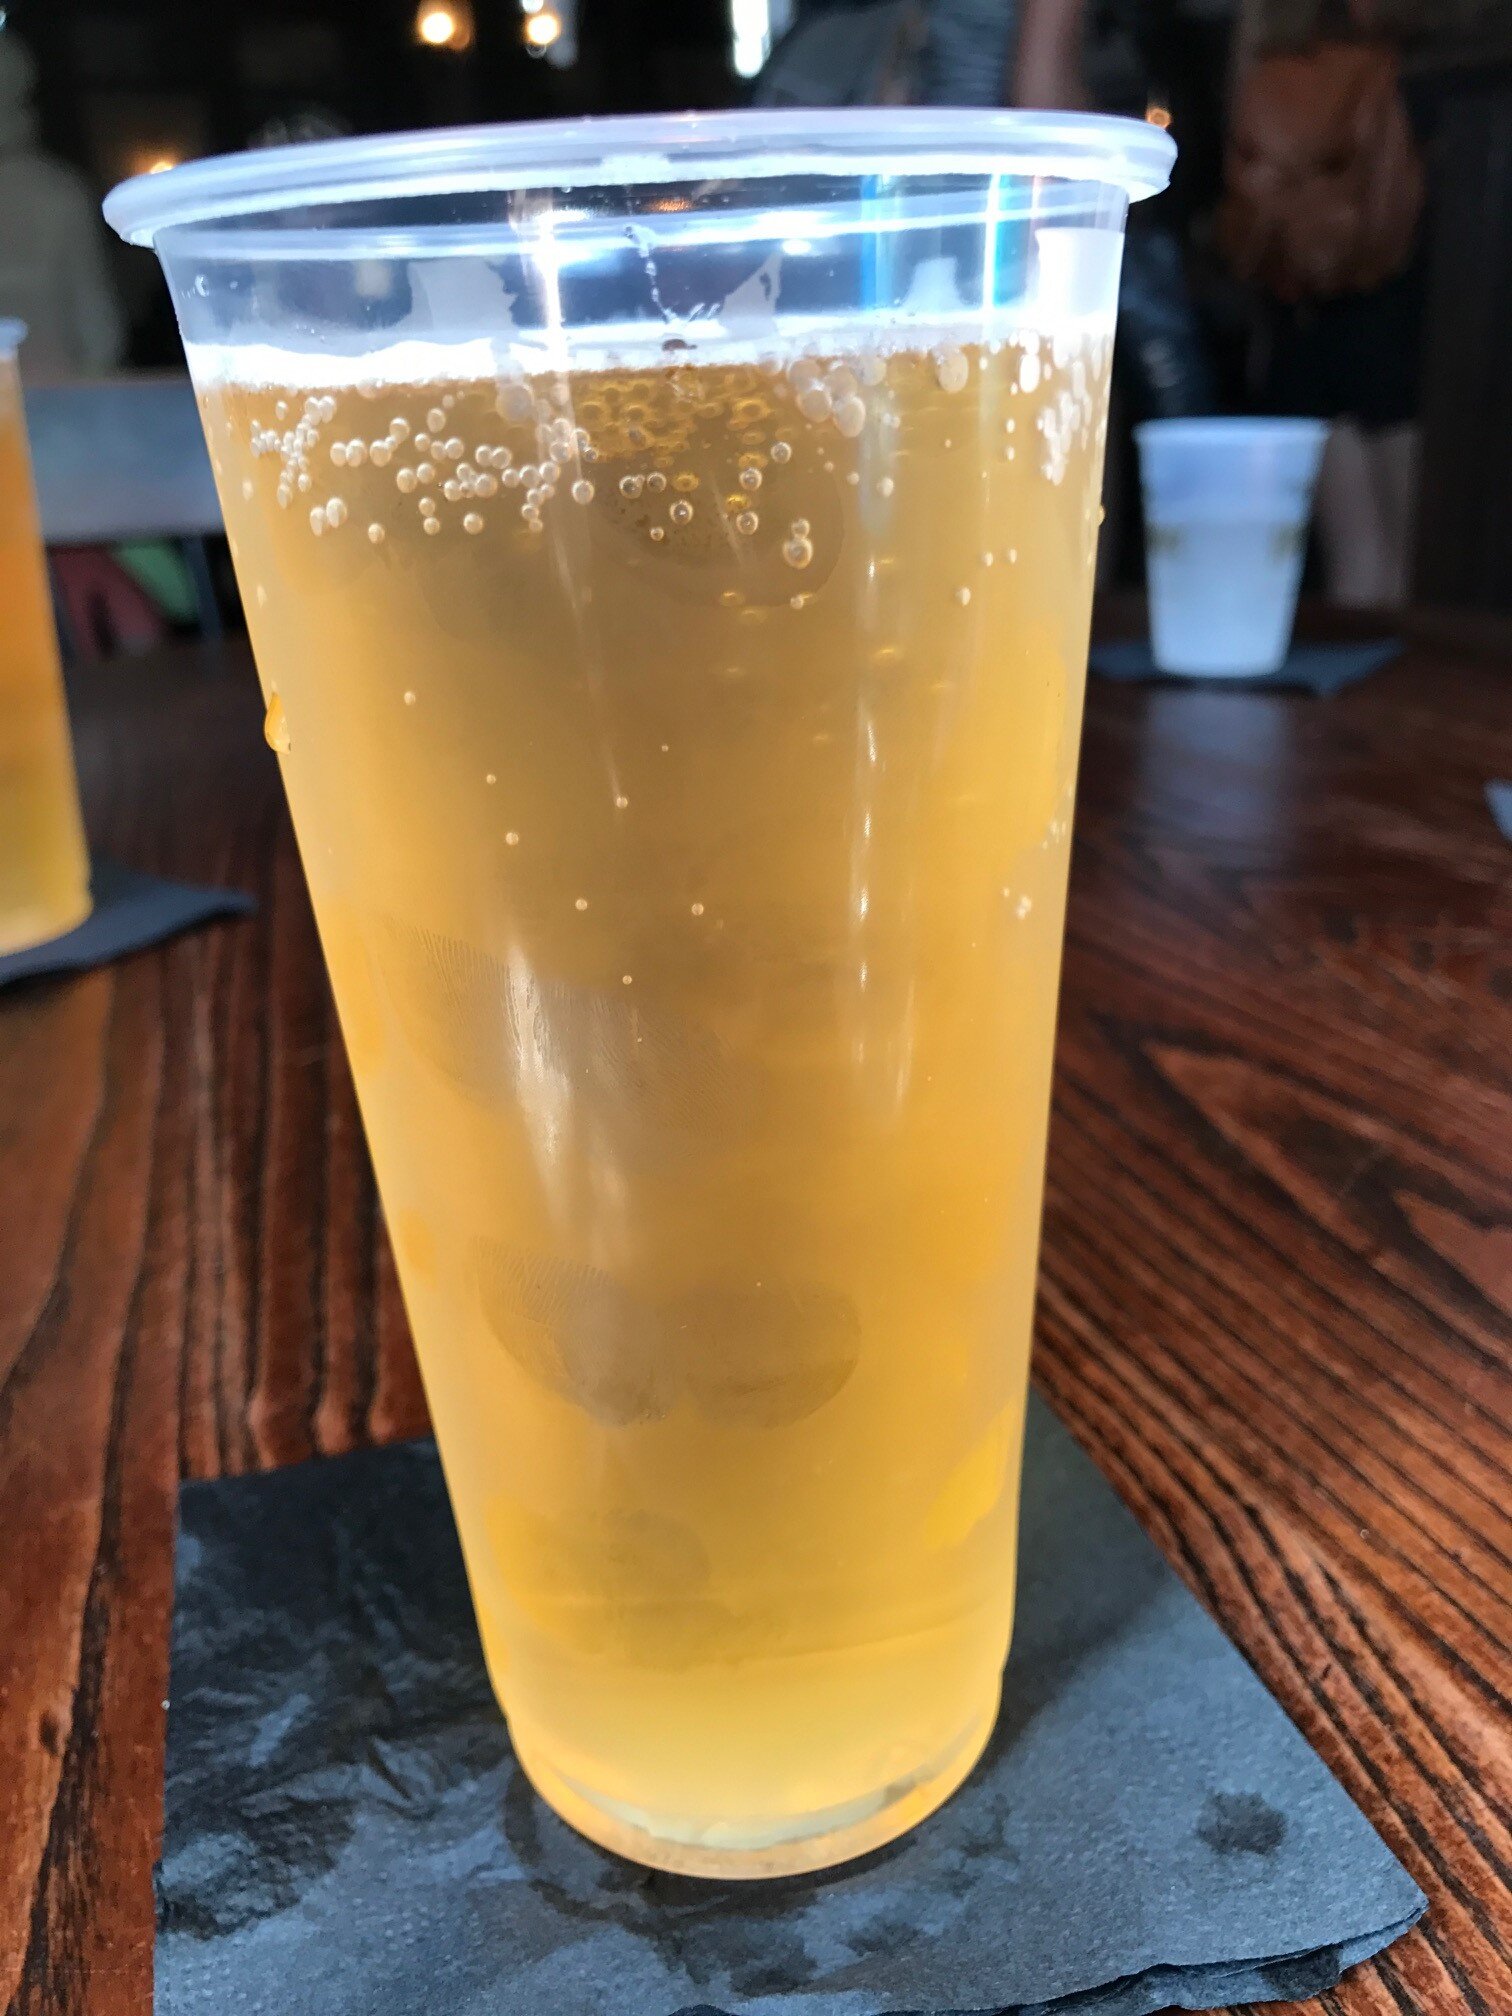 Strongbow Cider at Three Broomsticks